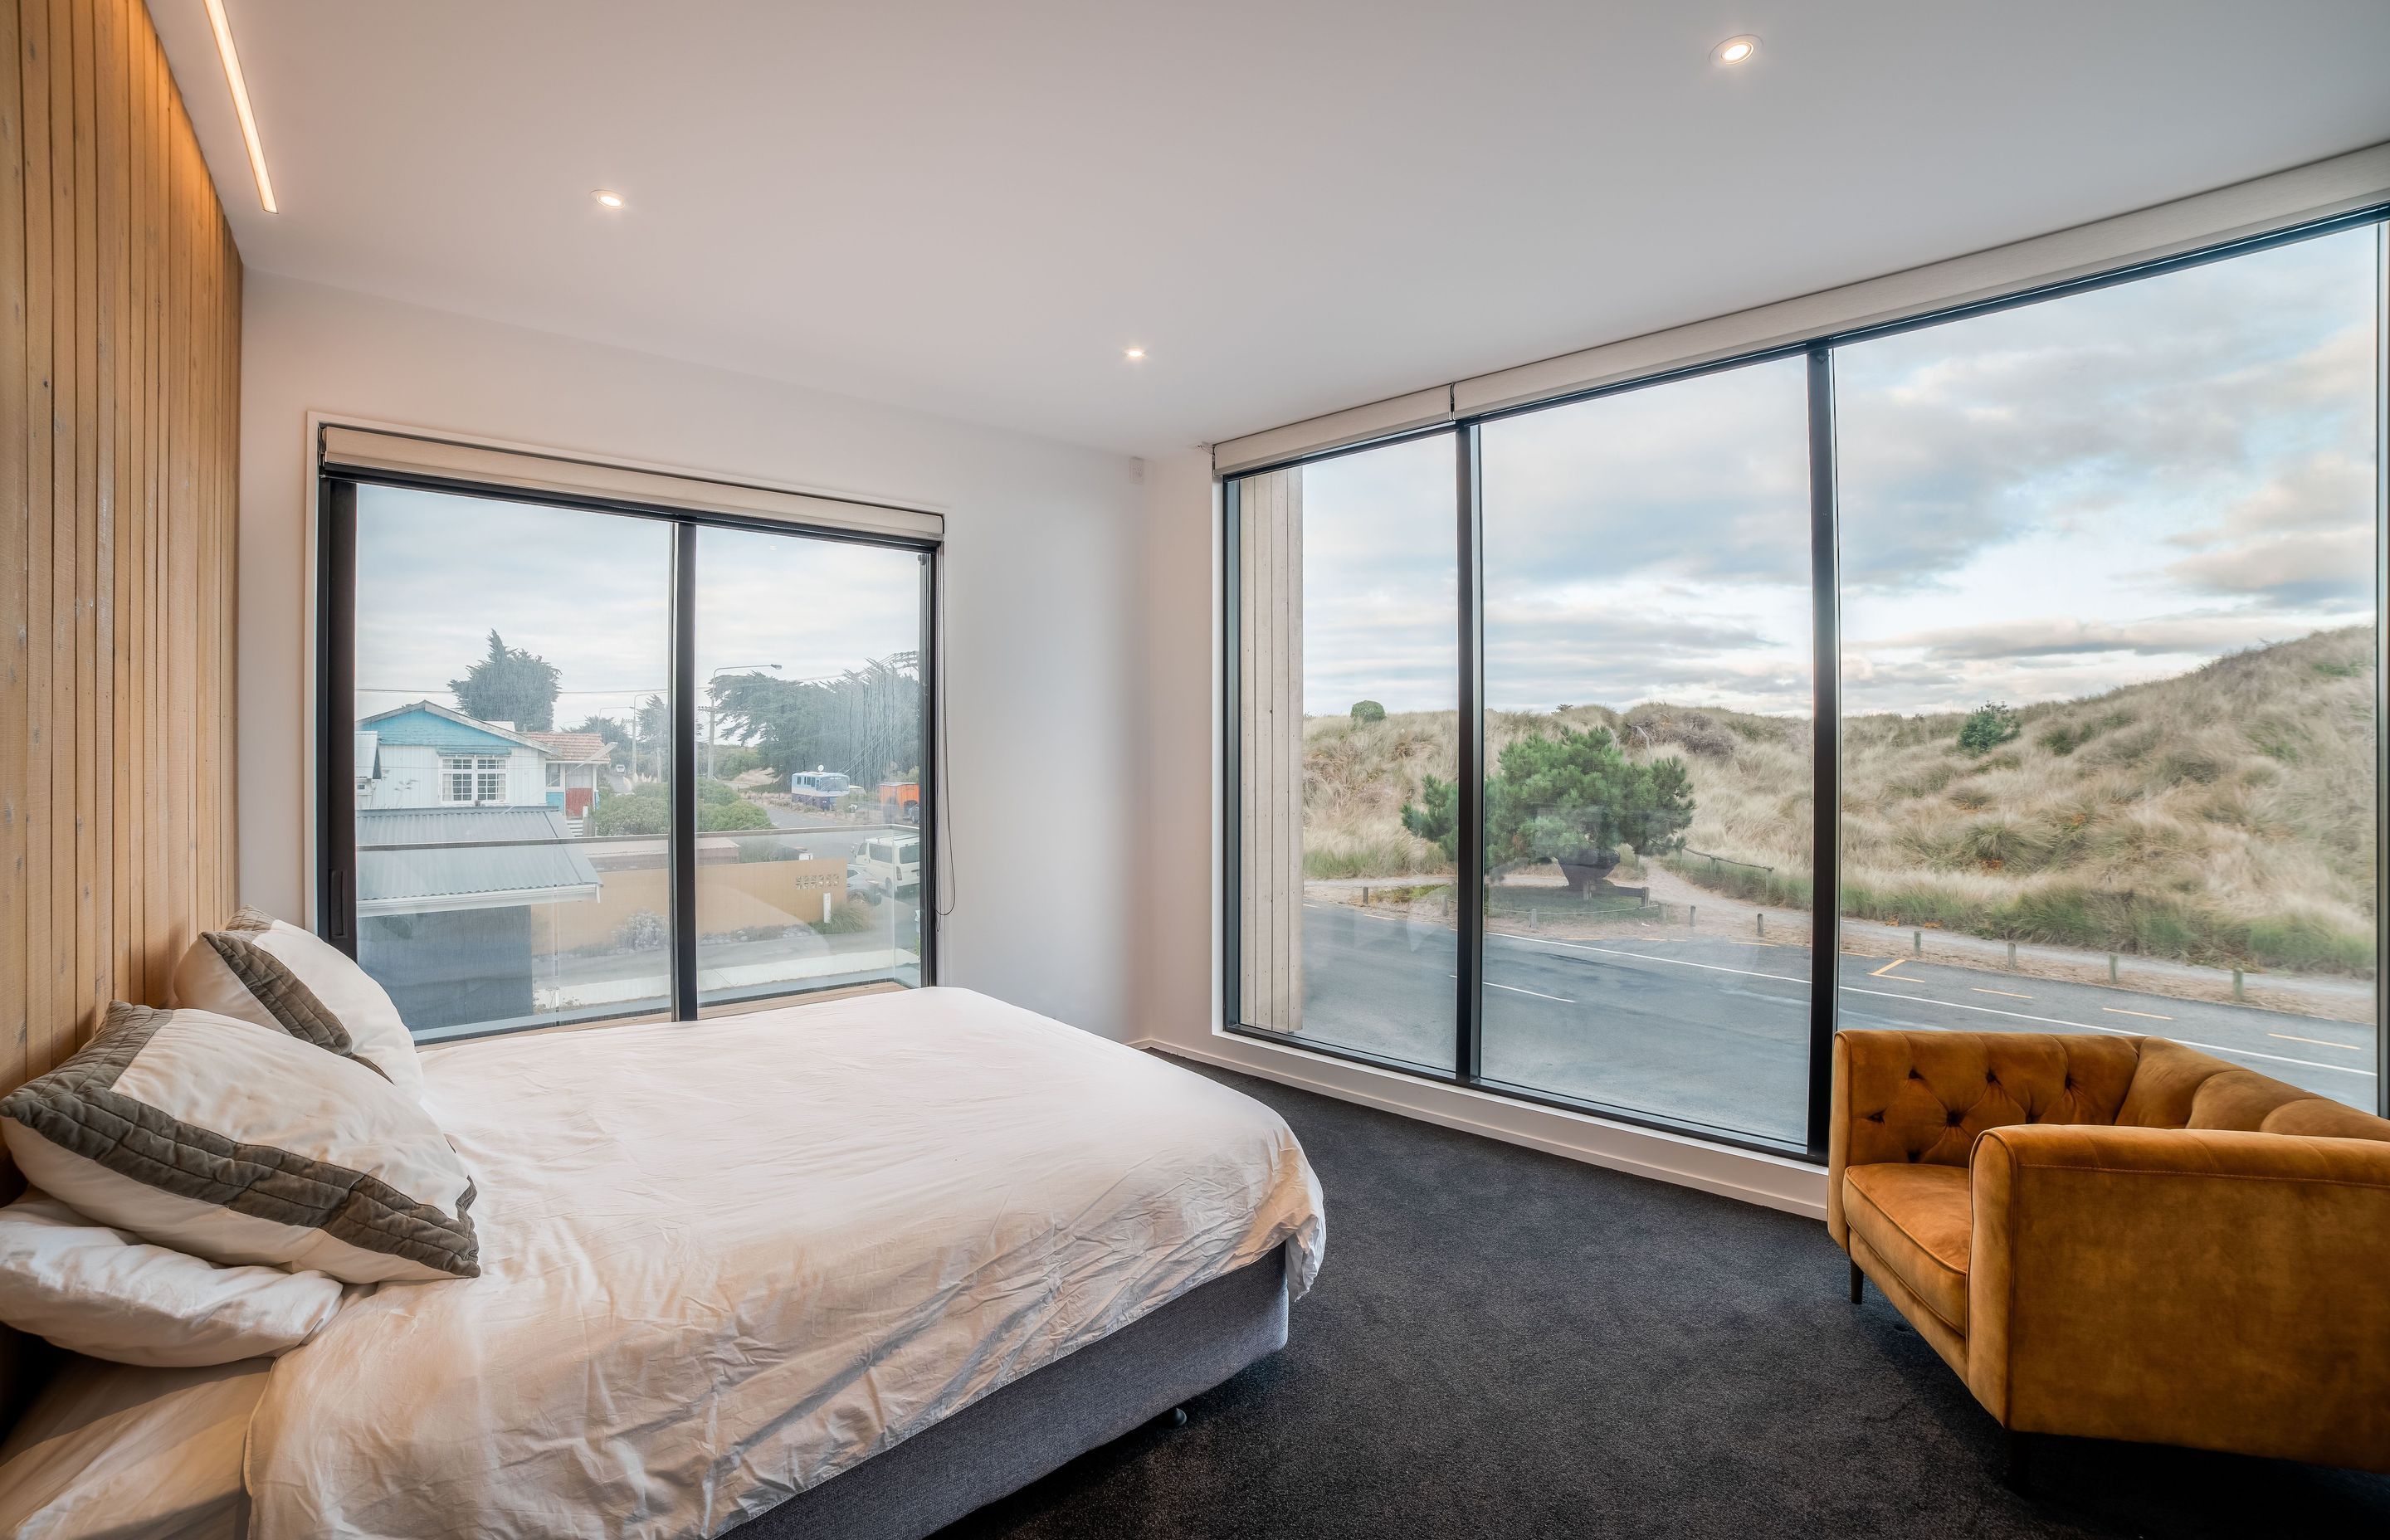 Full height glazing in the master bedroom affords views across to the dunes. 